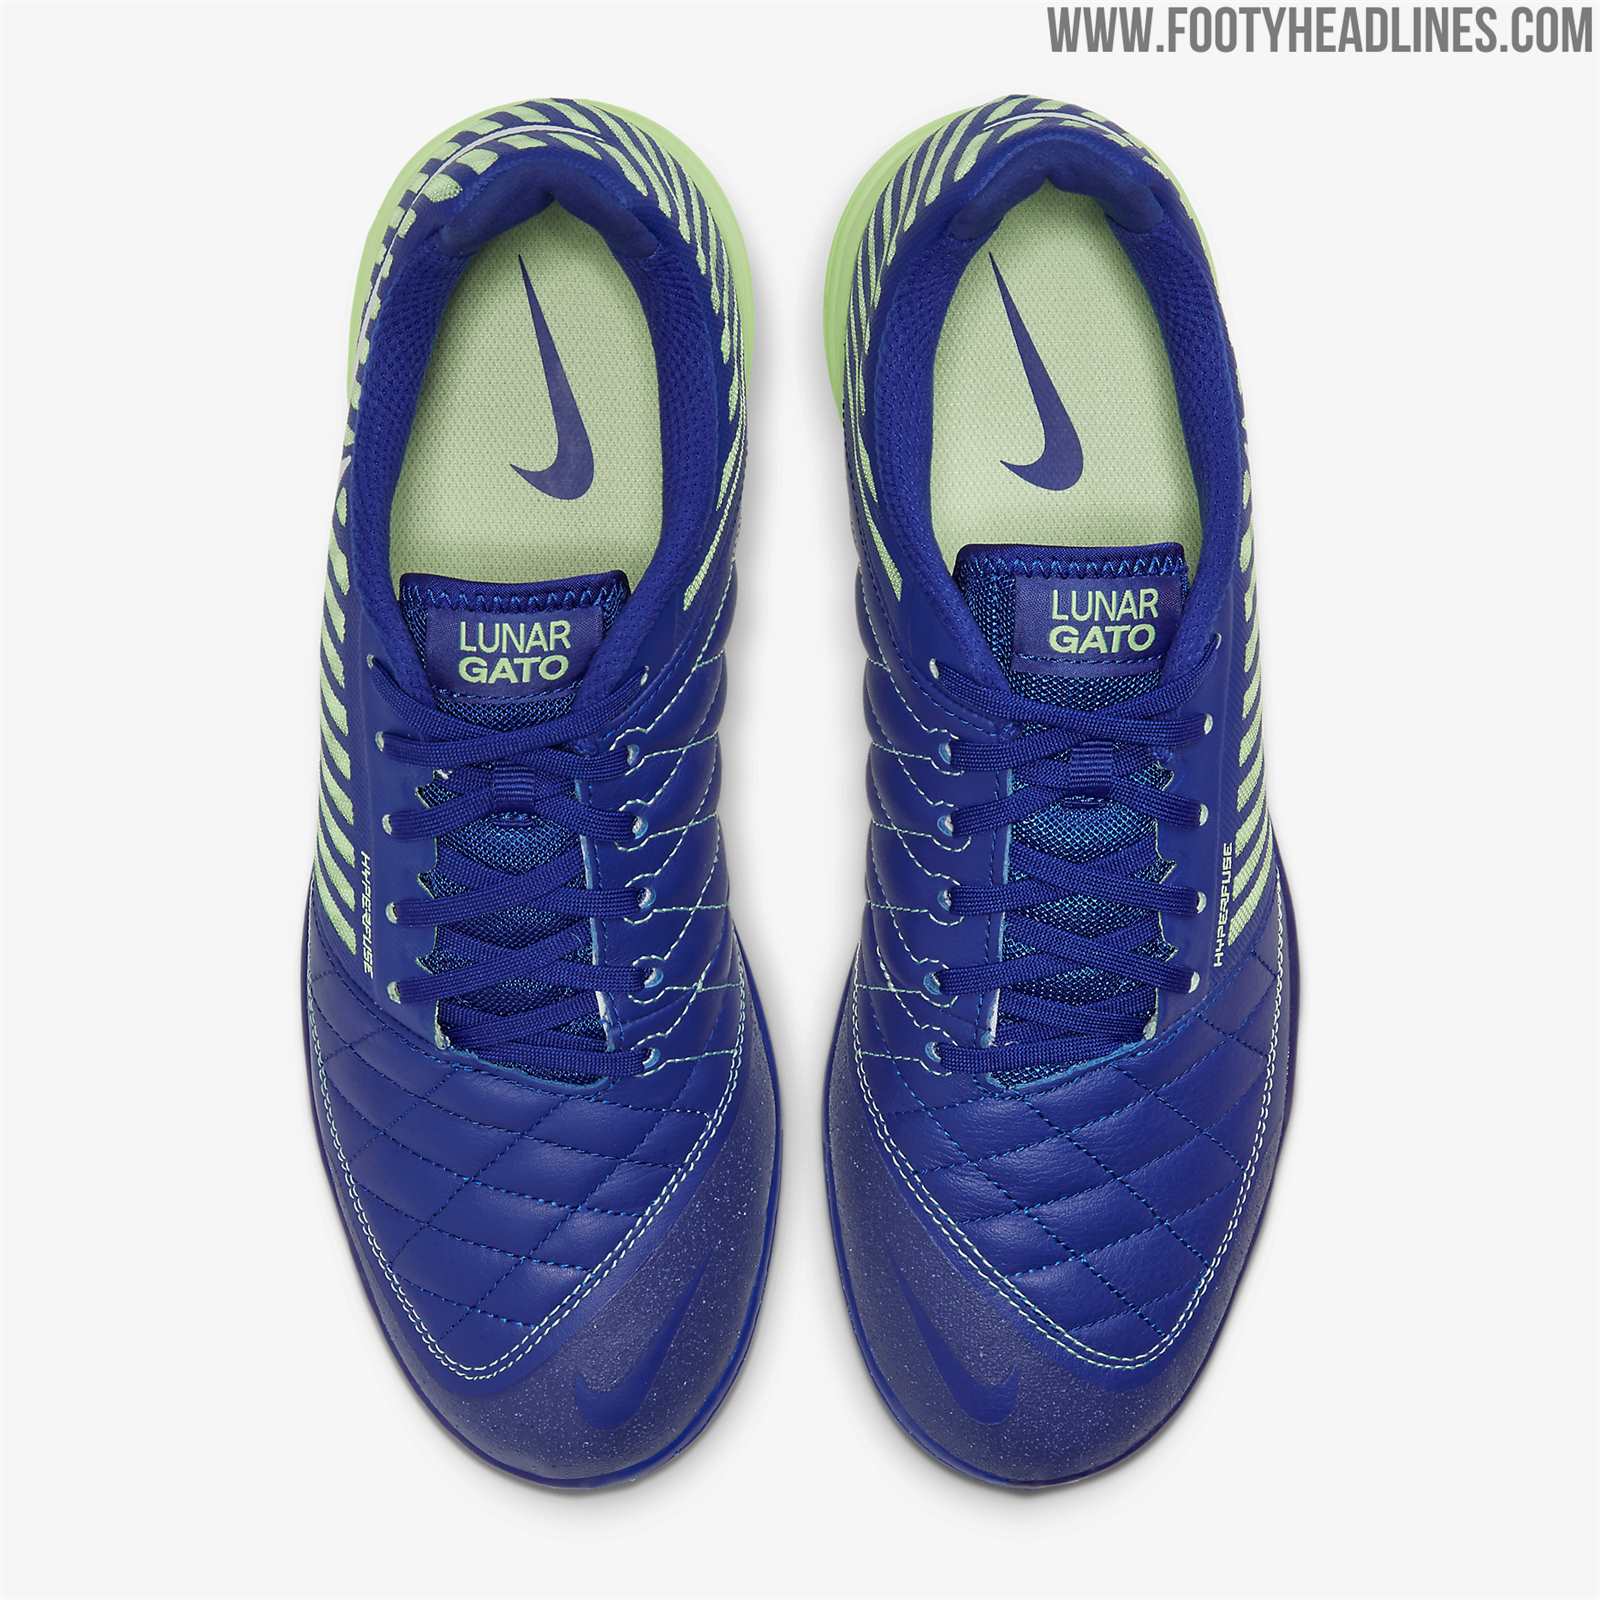 Nike 'Skycourt' Small-Sided Boots Pack Releaed - Lunar Gato, Premier ...